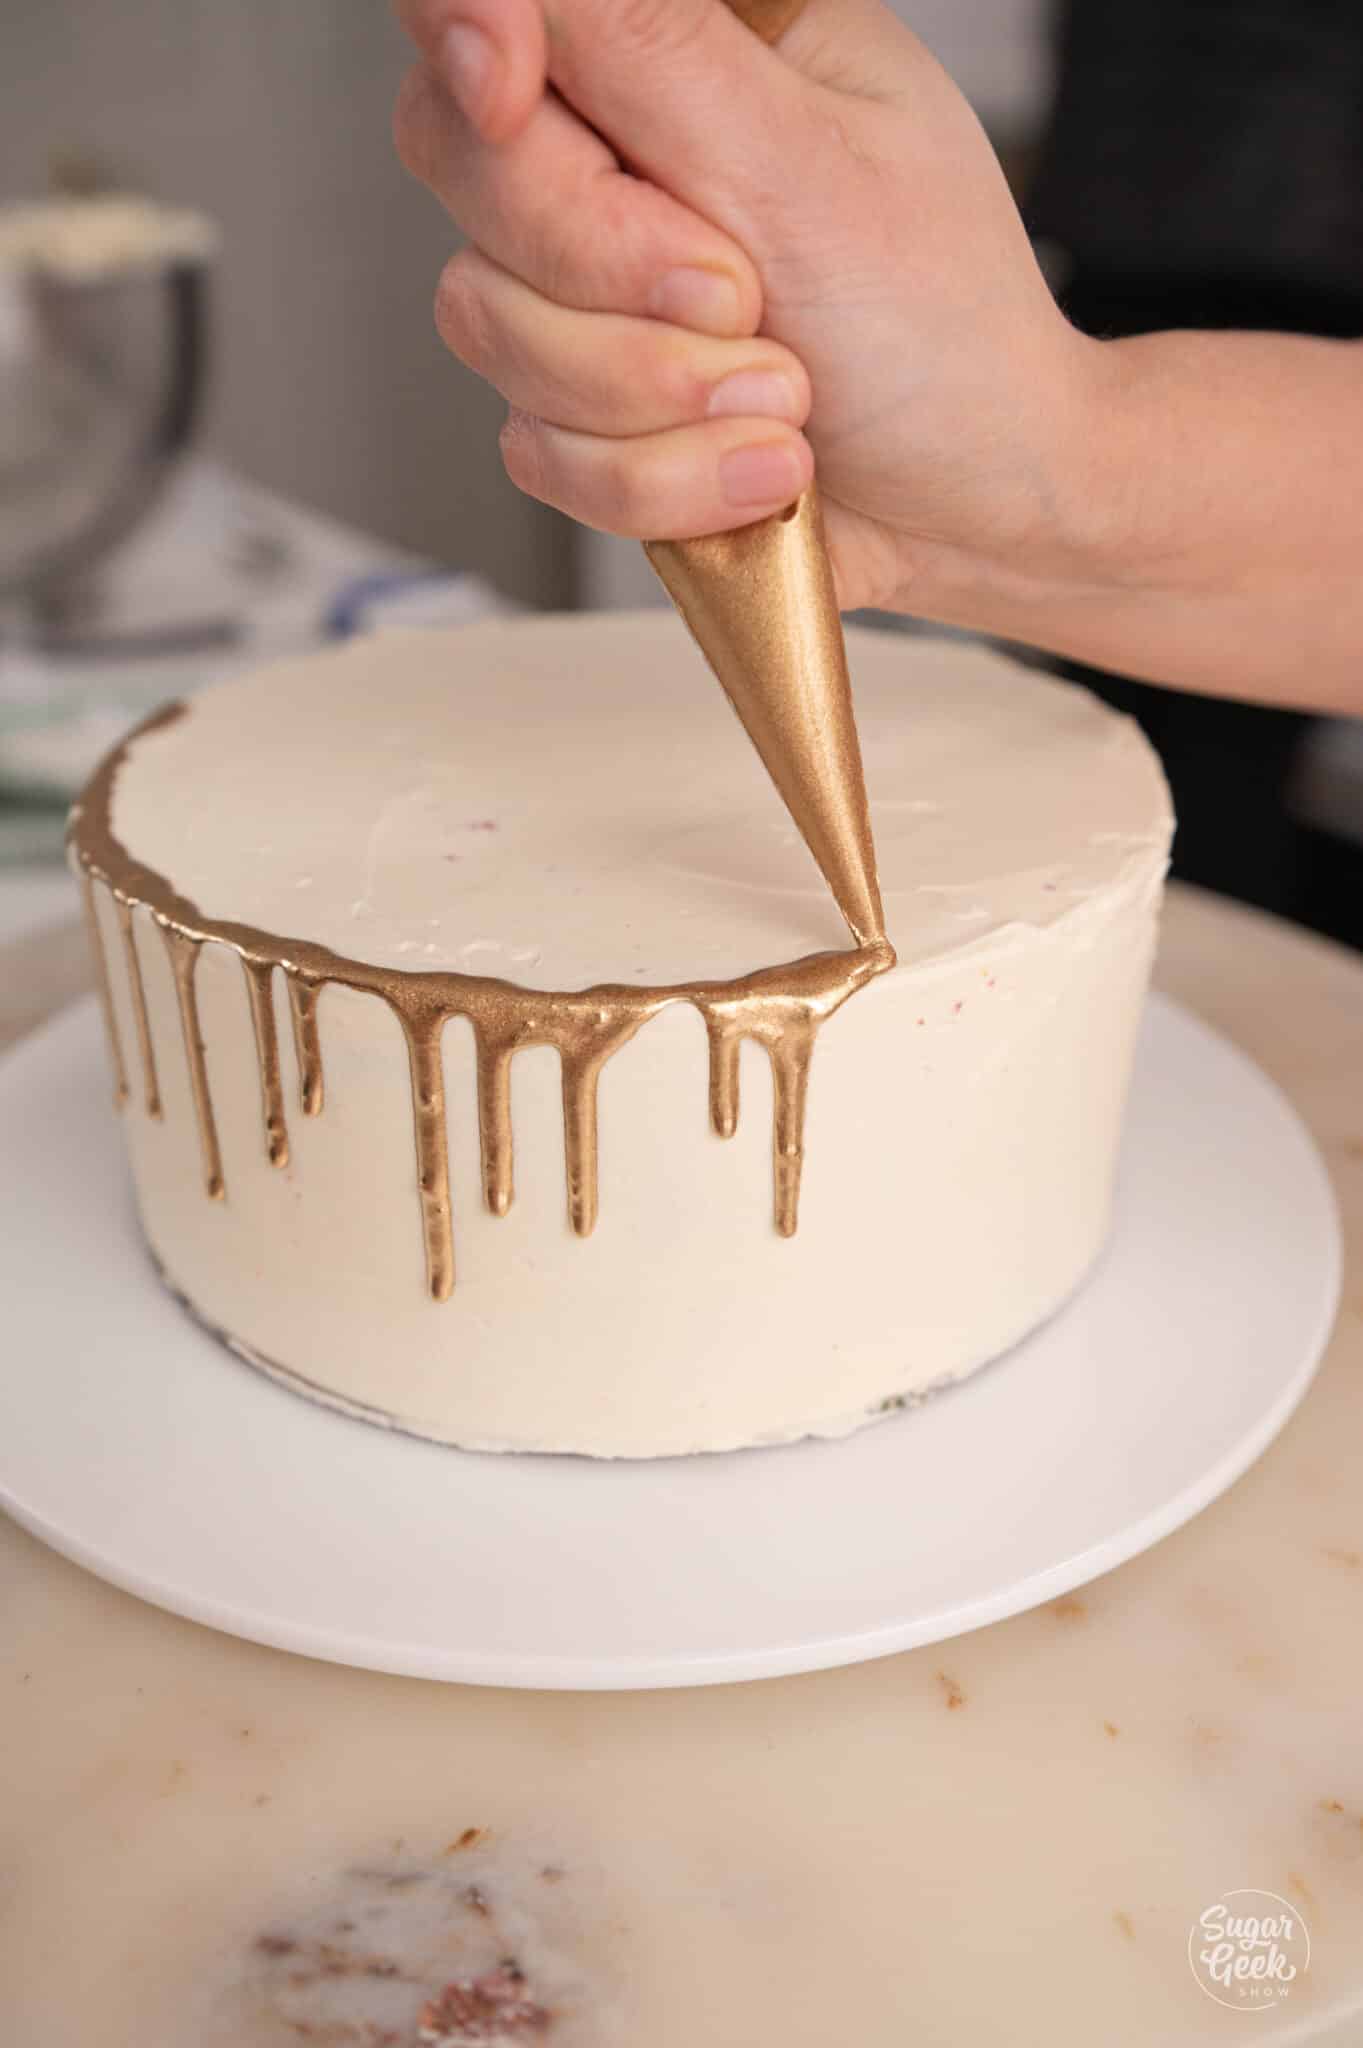 hand piping gold drip onto a chilled white cake